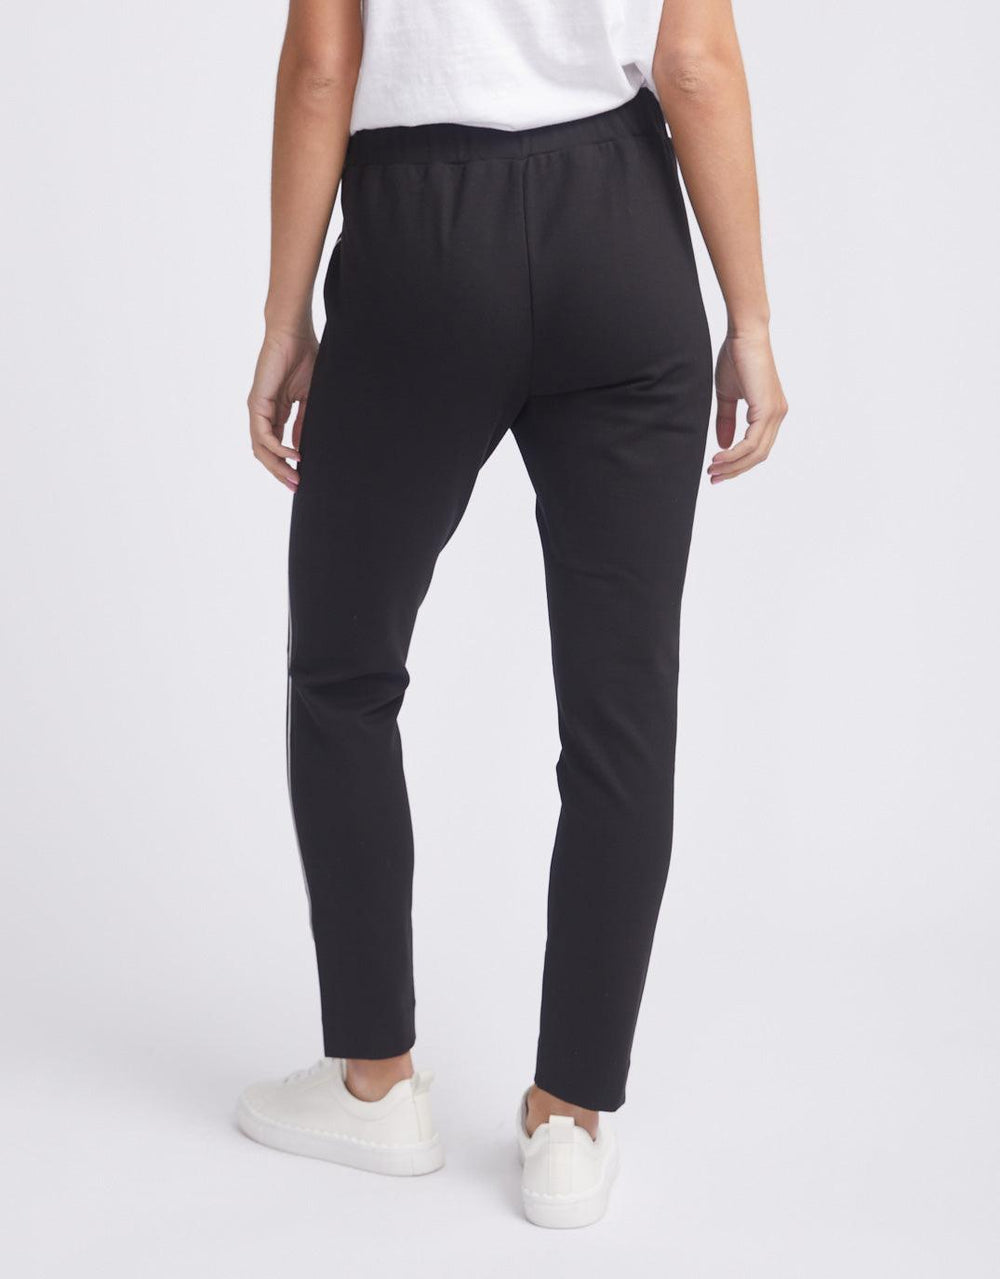 https://whiteandco.store/cdn/shop/products/white-and-co-signature-ponte-pant-black-white-and-co-living-pants-7_1000x.jpg?v=1706656612